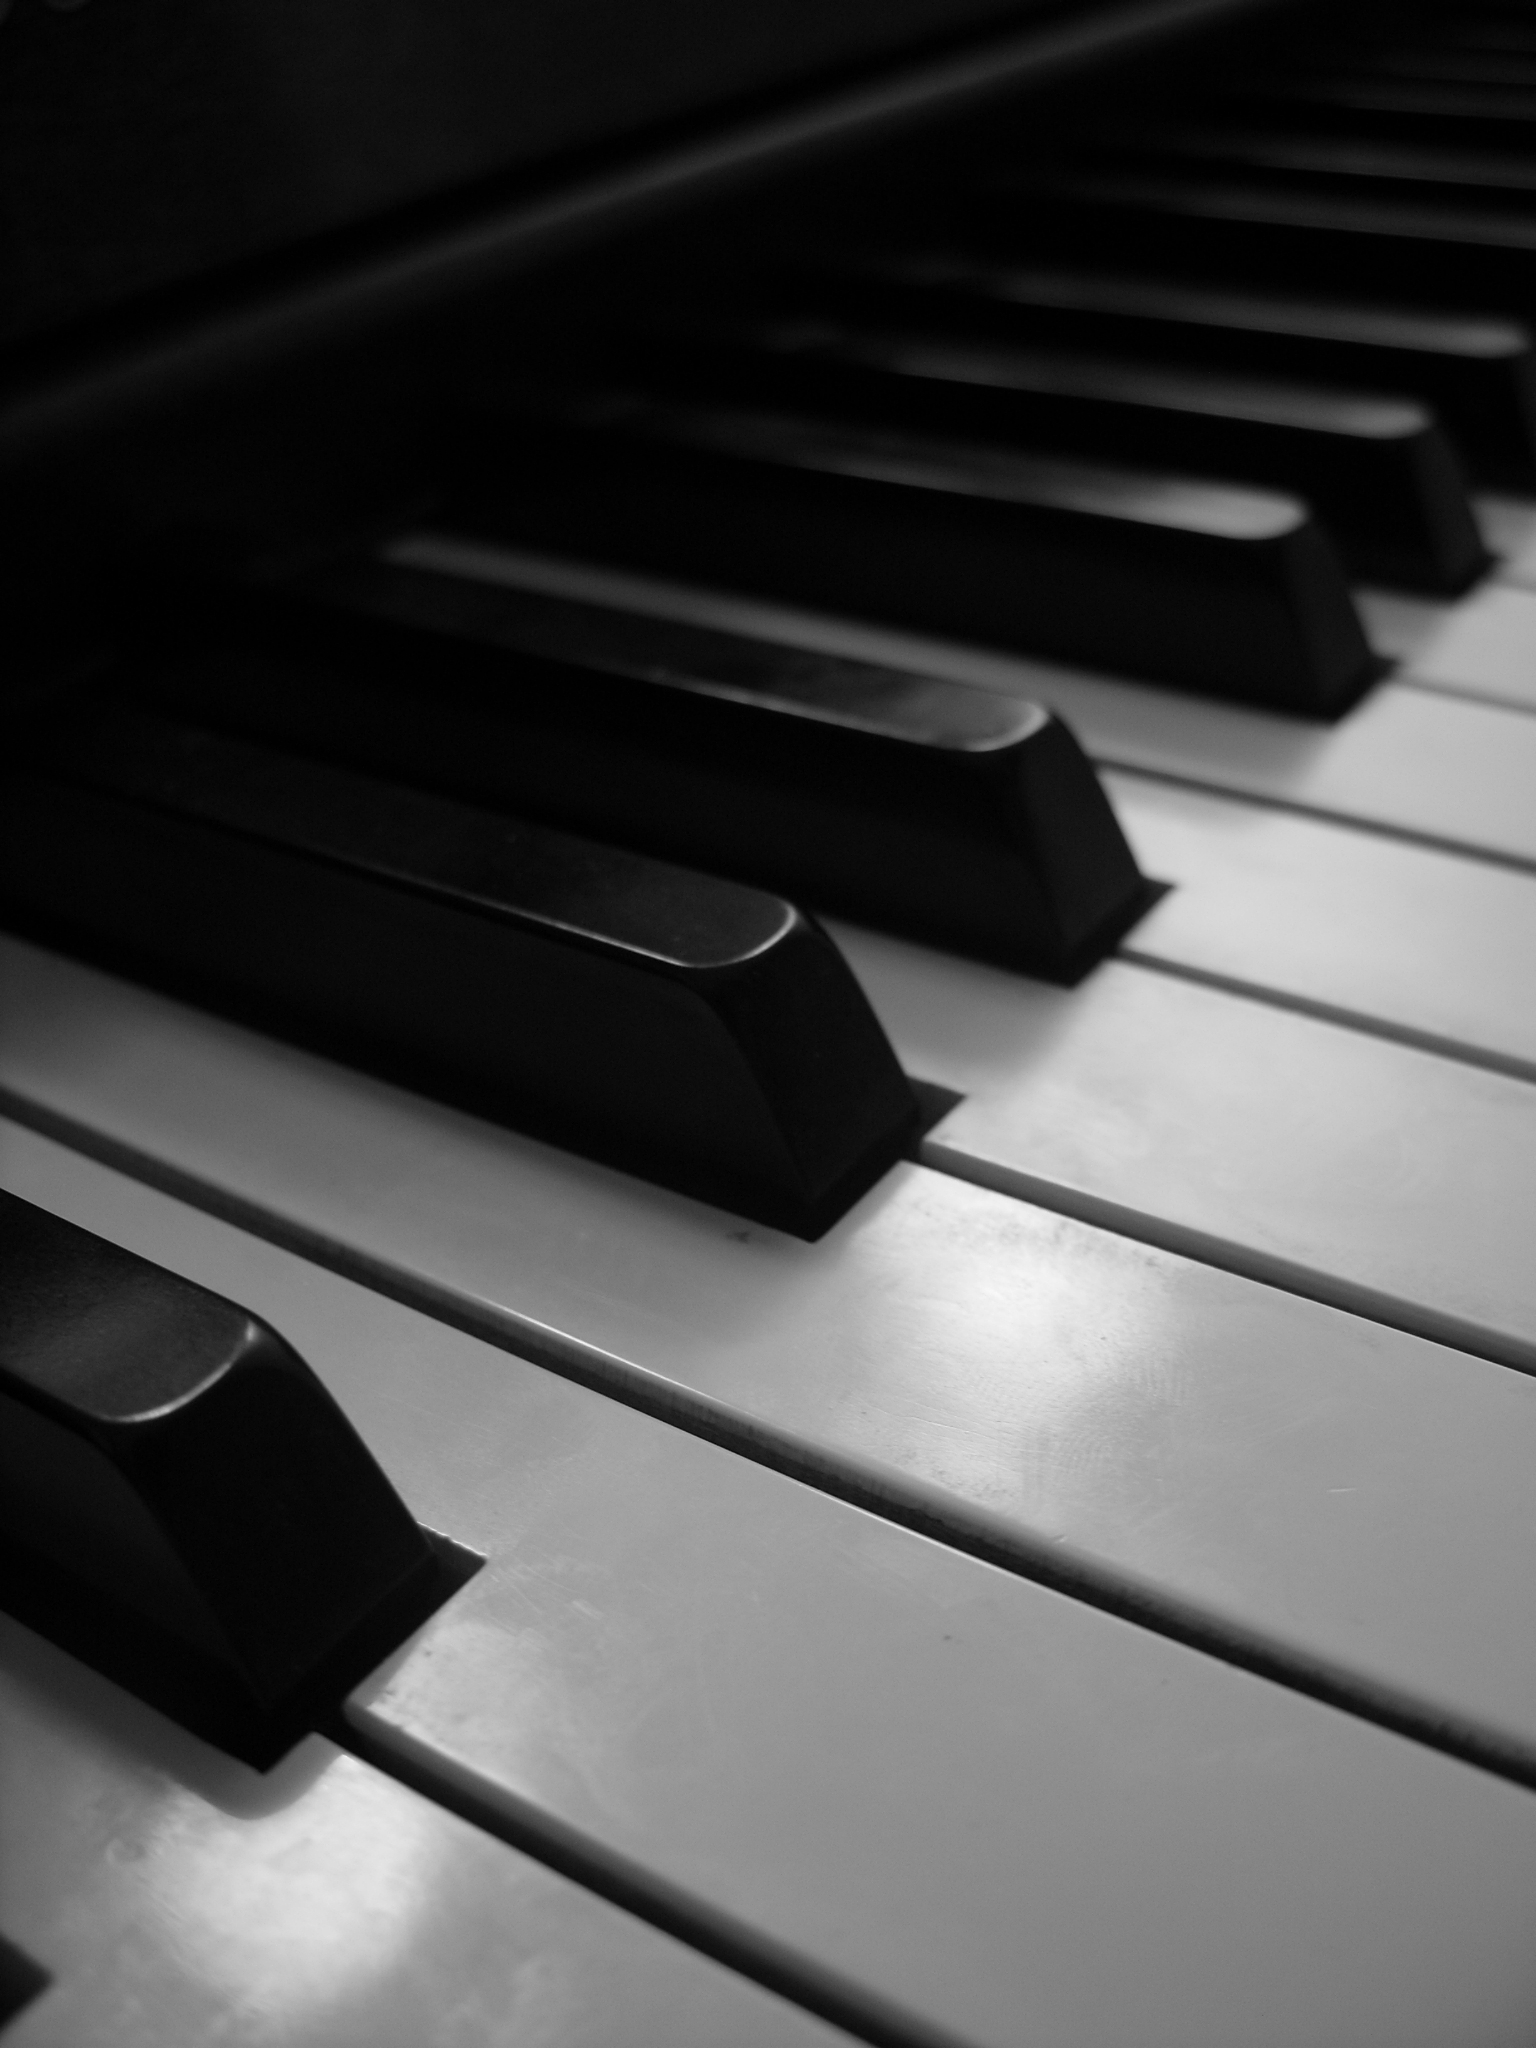 117237 download wallpaper piano, music, macro, musical instrument, bw, chb, keys screensavers and pictures for free